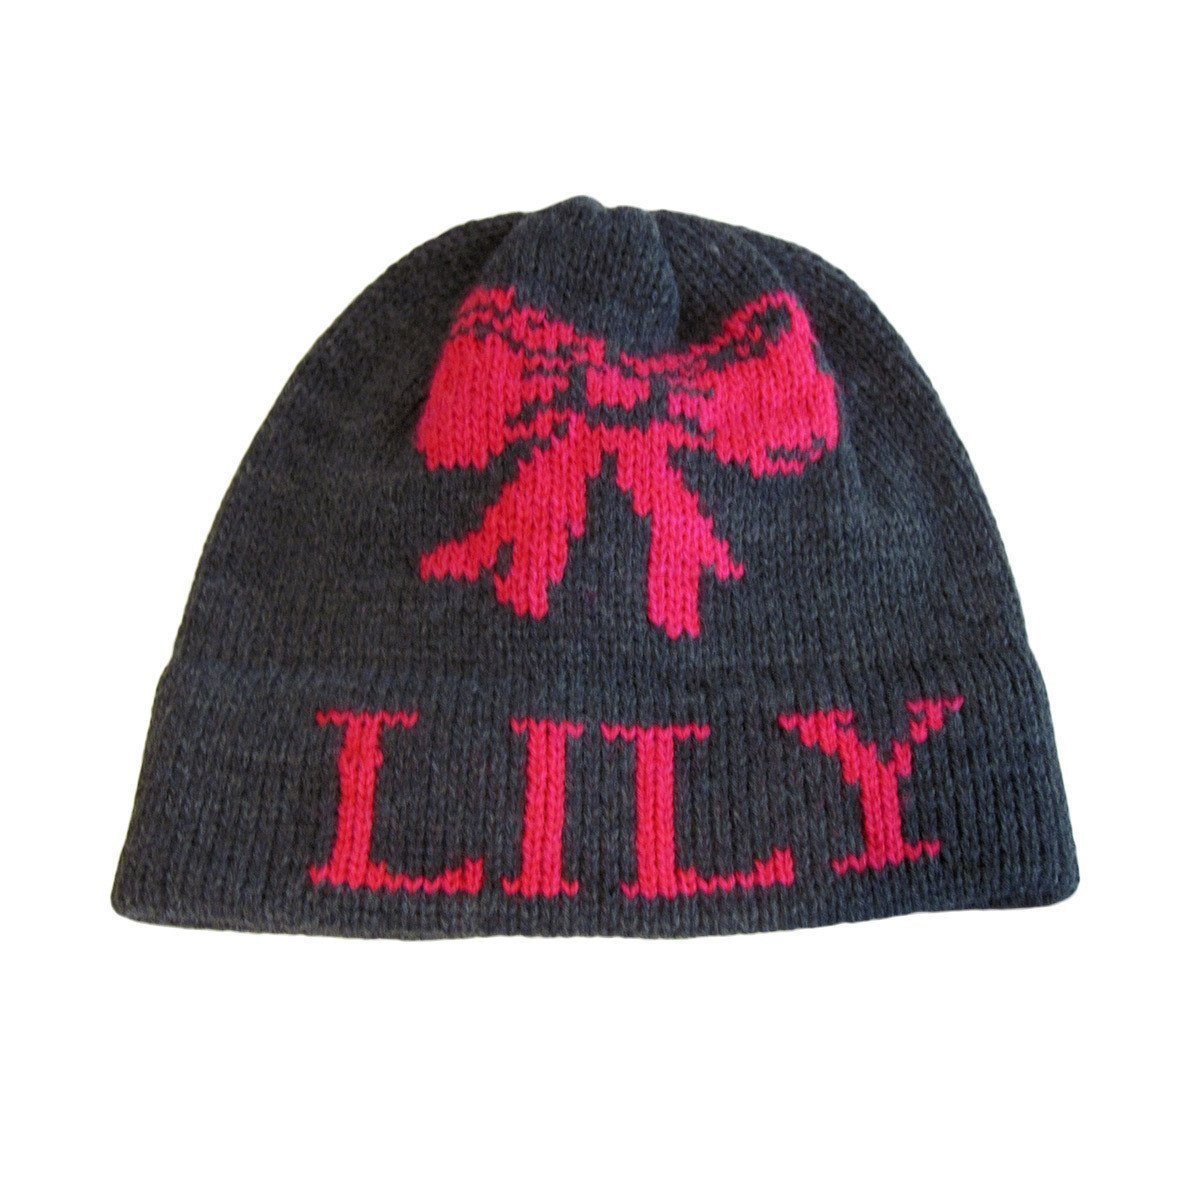 Bow Personalized Knit Hat-Hats-Jack and Jill Boutique